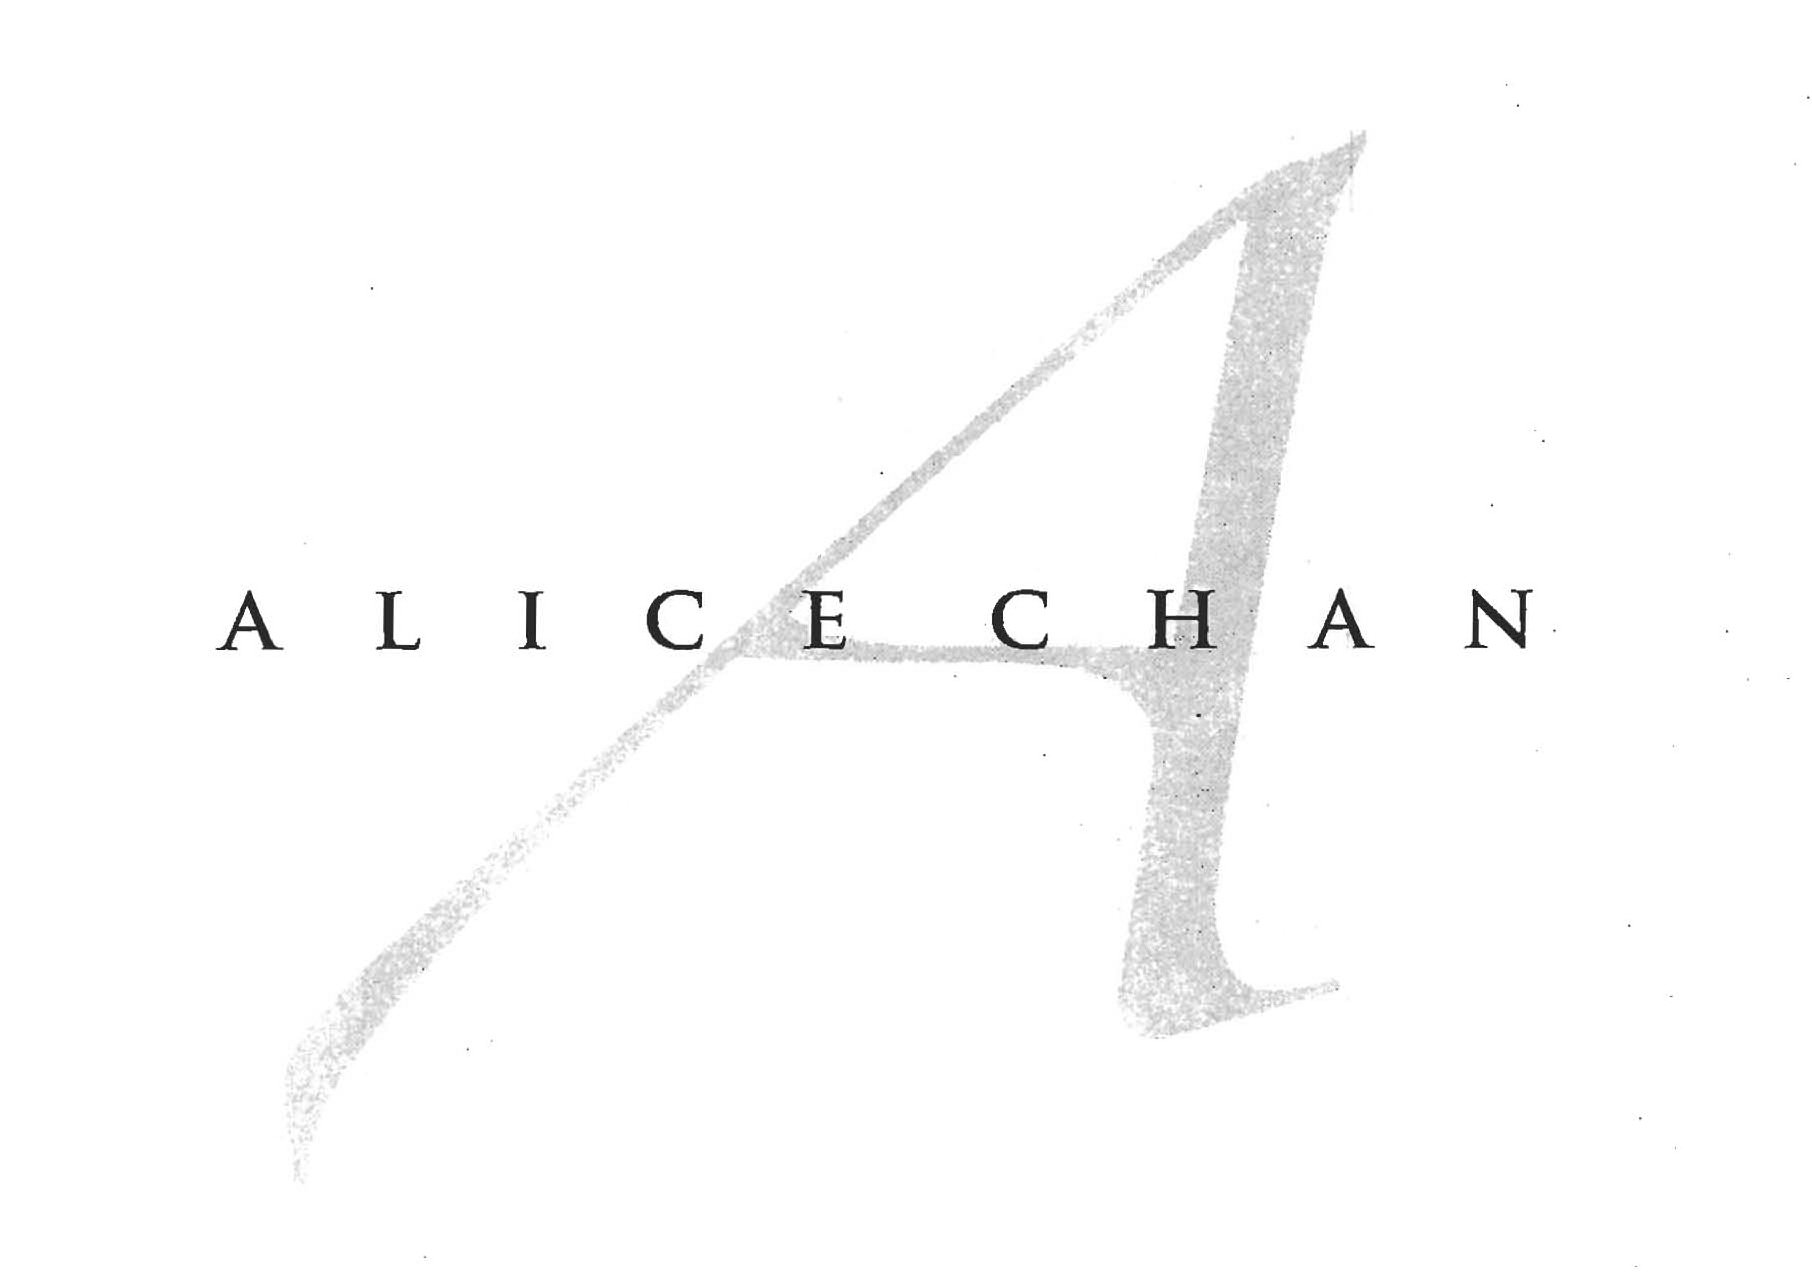  A ALICE CHAN